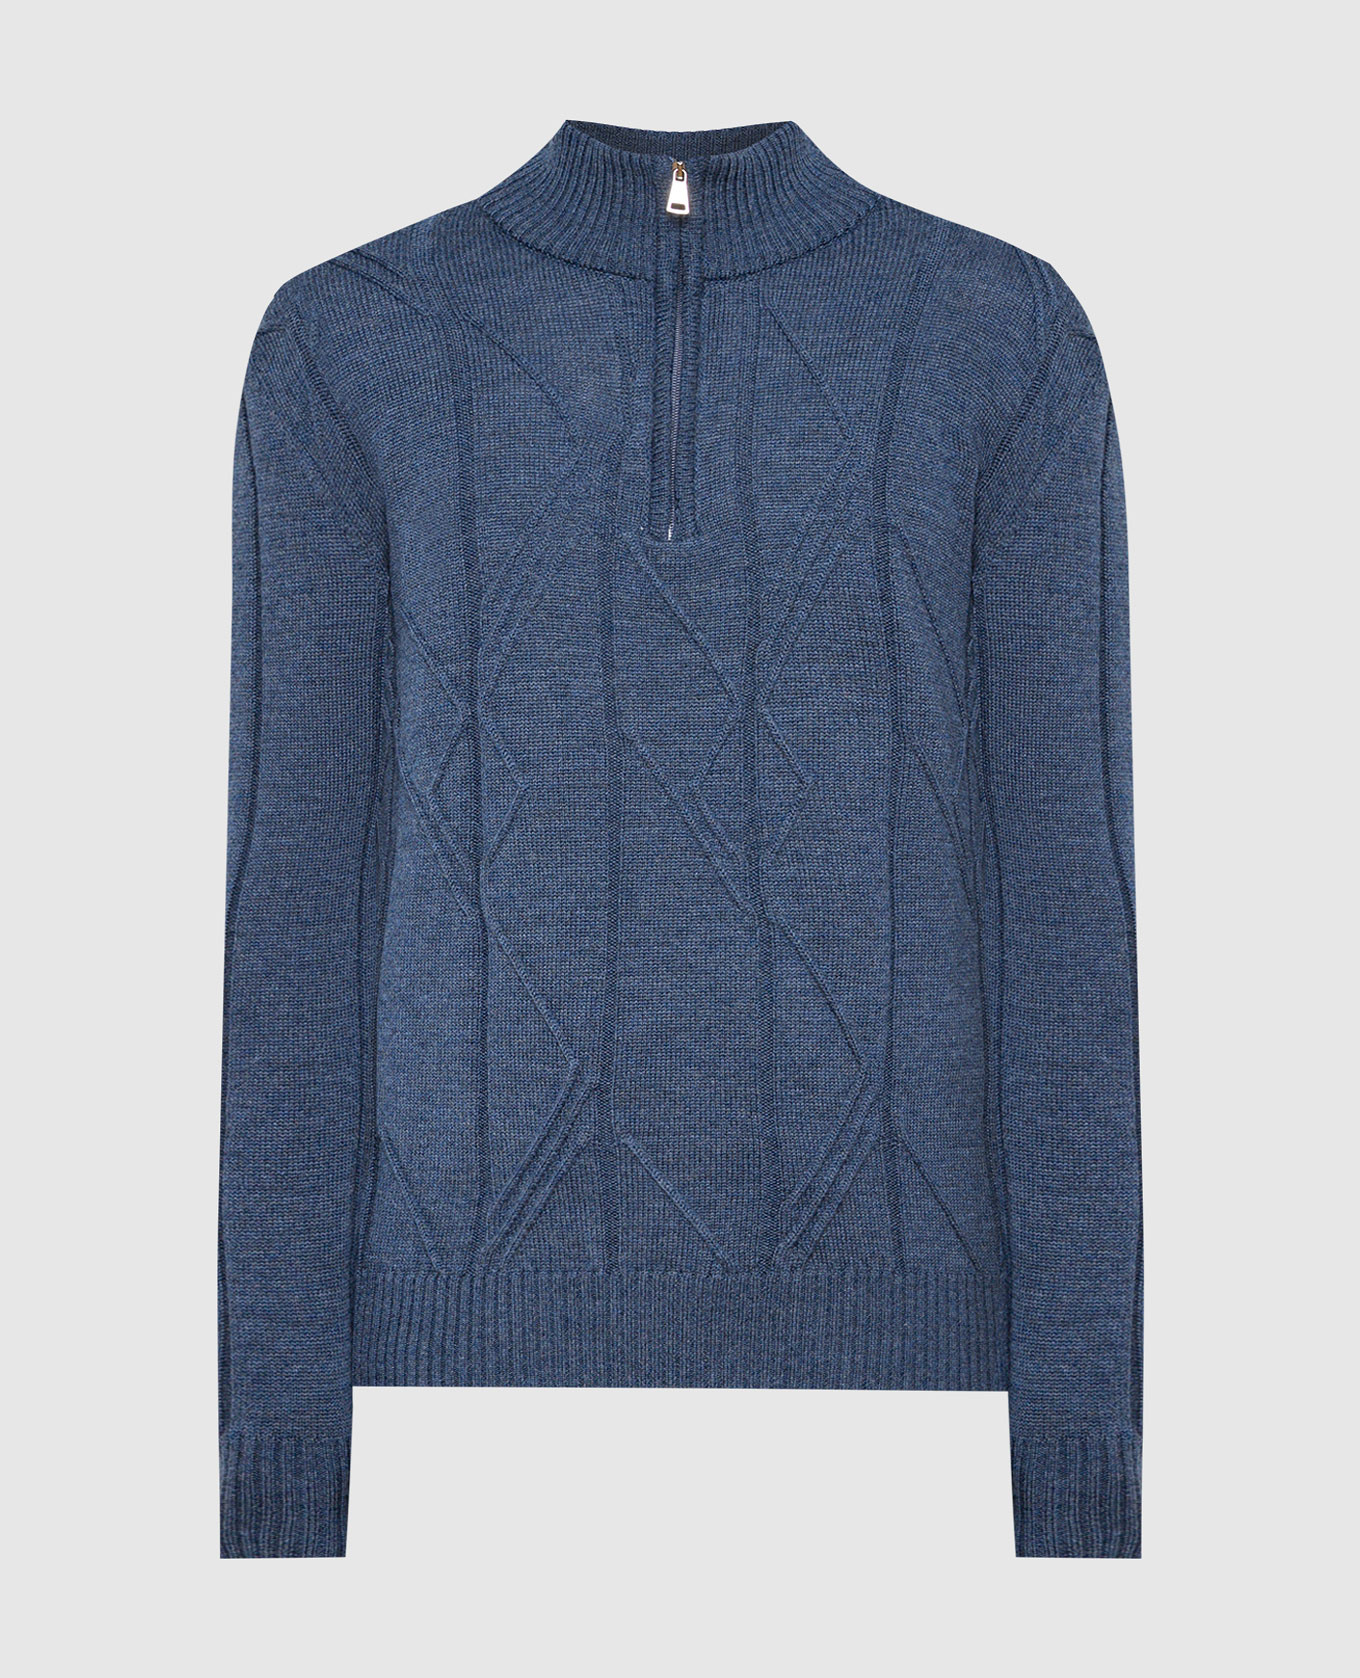 Blue sweater made of wool in a textured pattern